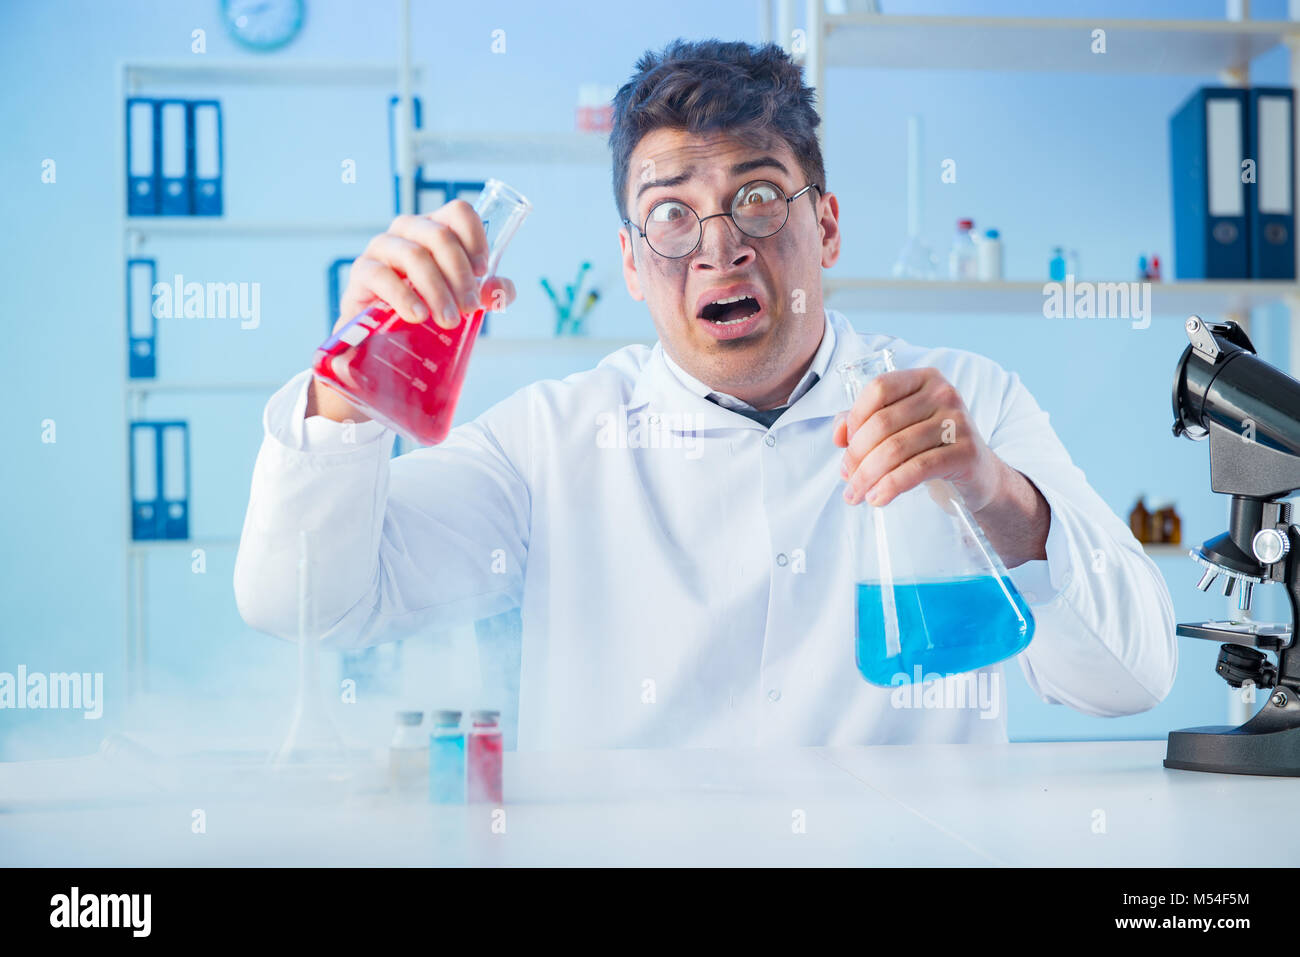 Funny mad chemist working in a laboratory Stock Photo